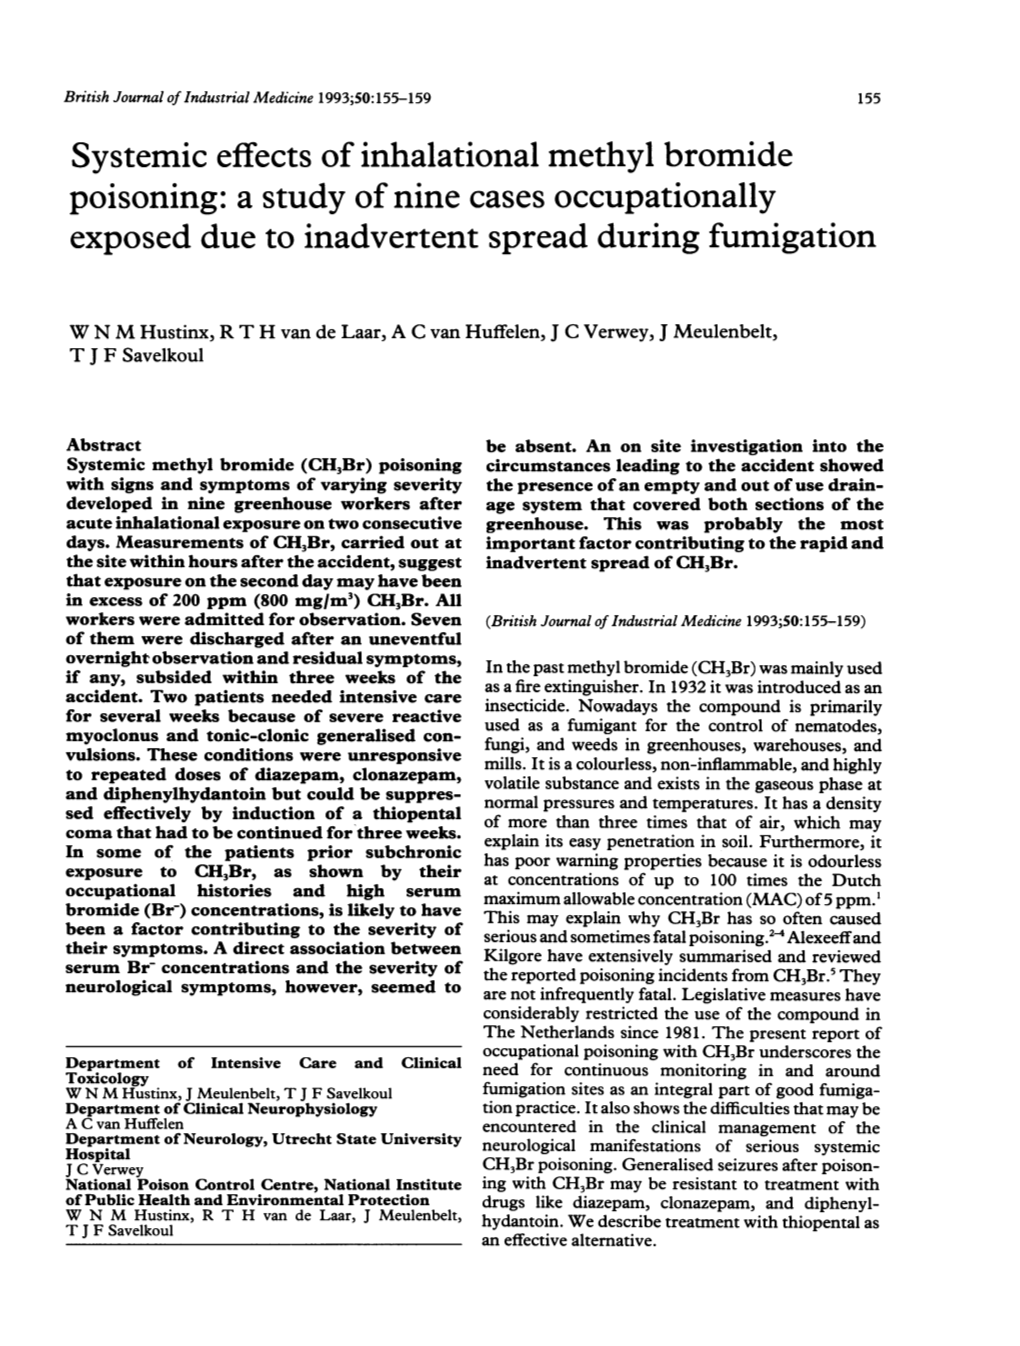 Poisoning: a Study of Nine Cases Occupationally Exposed Due to Inadvertent Spread During Fumigation